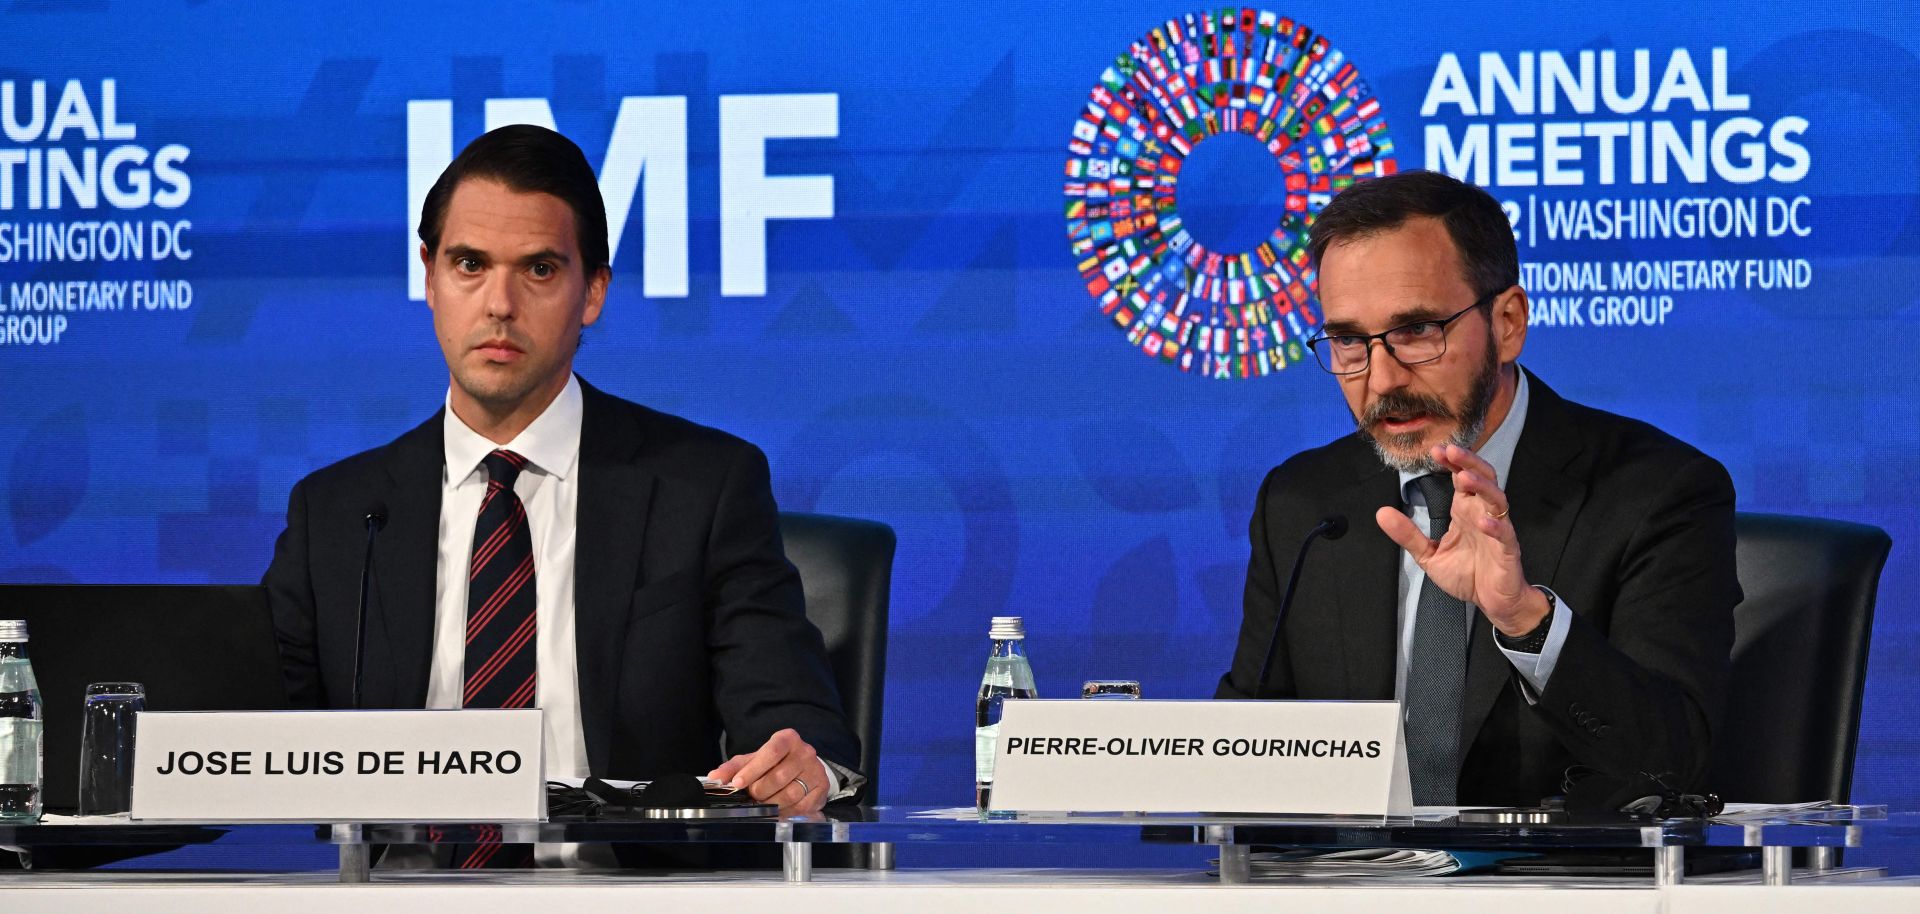 International Monetary Fund (IMF) chief economist Pierre-Olivier Gourinchas speaks at a press conference with IMF communications officer Jose Luis De Haro during the World Bank/IMF annual meeting in Washington, D.C., on Oct. 11, 2022. 